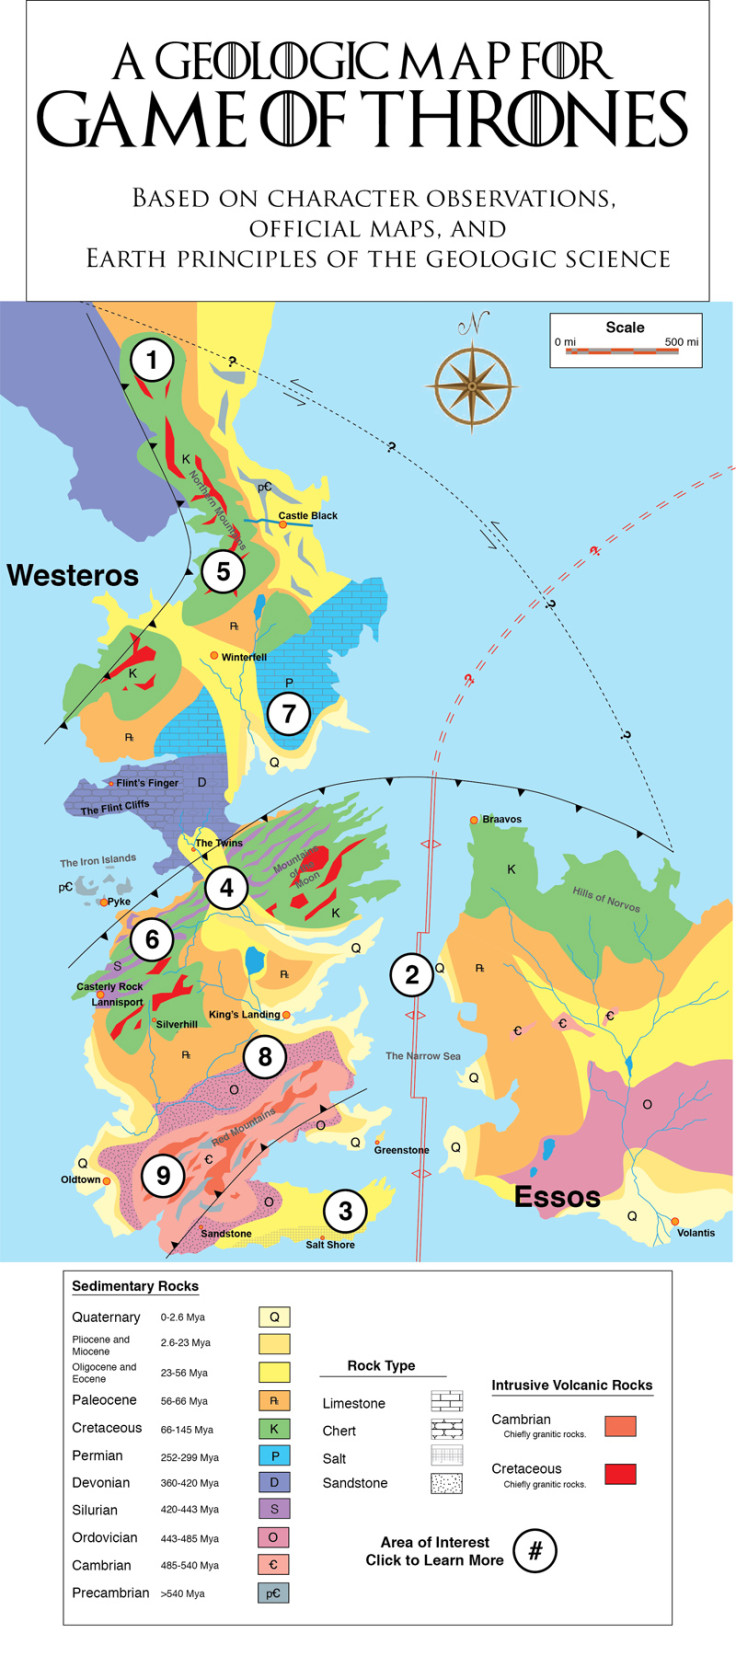 A Geologic Map for Game of Thrones